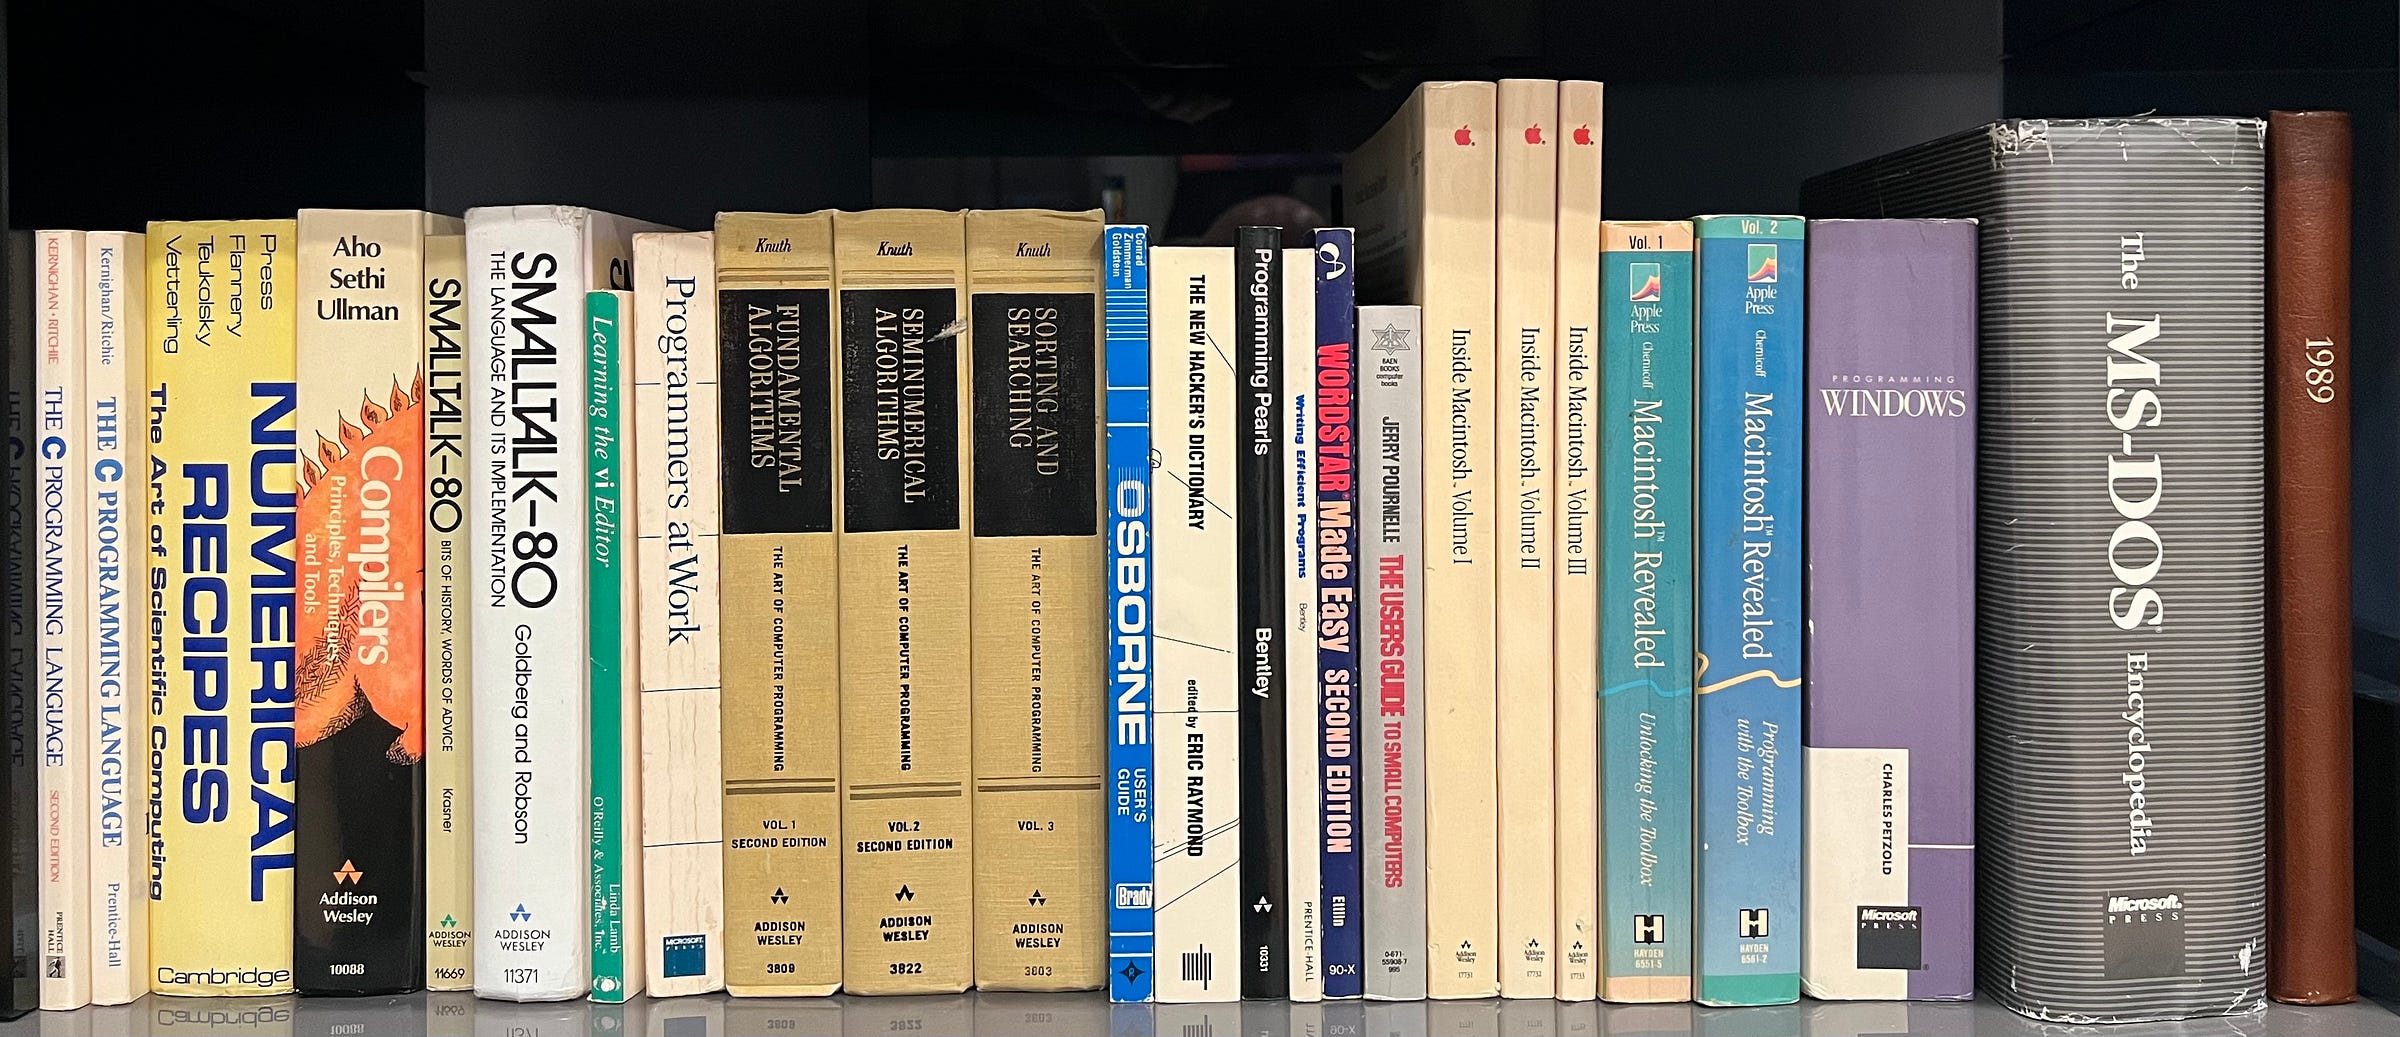 Some books from my shelf including: Numerical Recipes, Compilers: Princples, Techniques, and Tools, SmallTalk 80, Learning the vi Editor, the C++ Programming Language, Donald Knuth set, The Osborne User Guide, Macintosh Revealed volumes 1 and 2, Wordstar Made Easy, Undocumented Windows, Windows Programming by Petzold